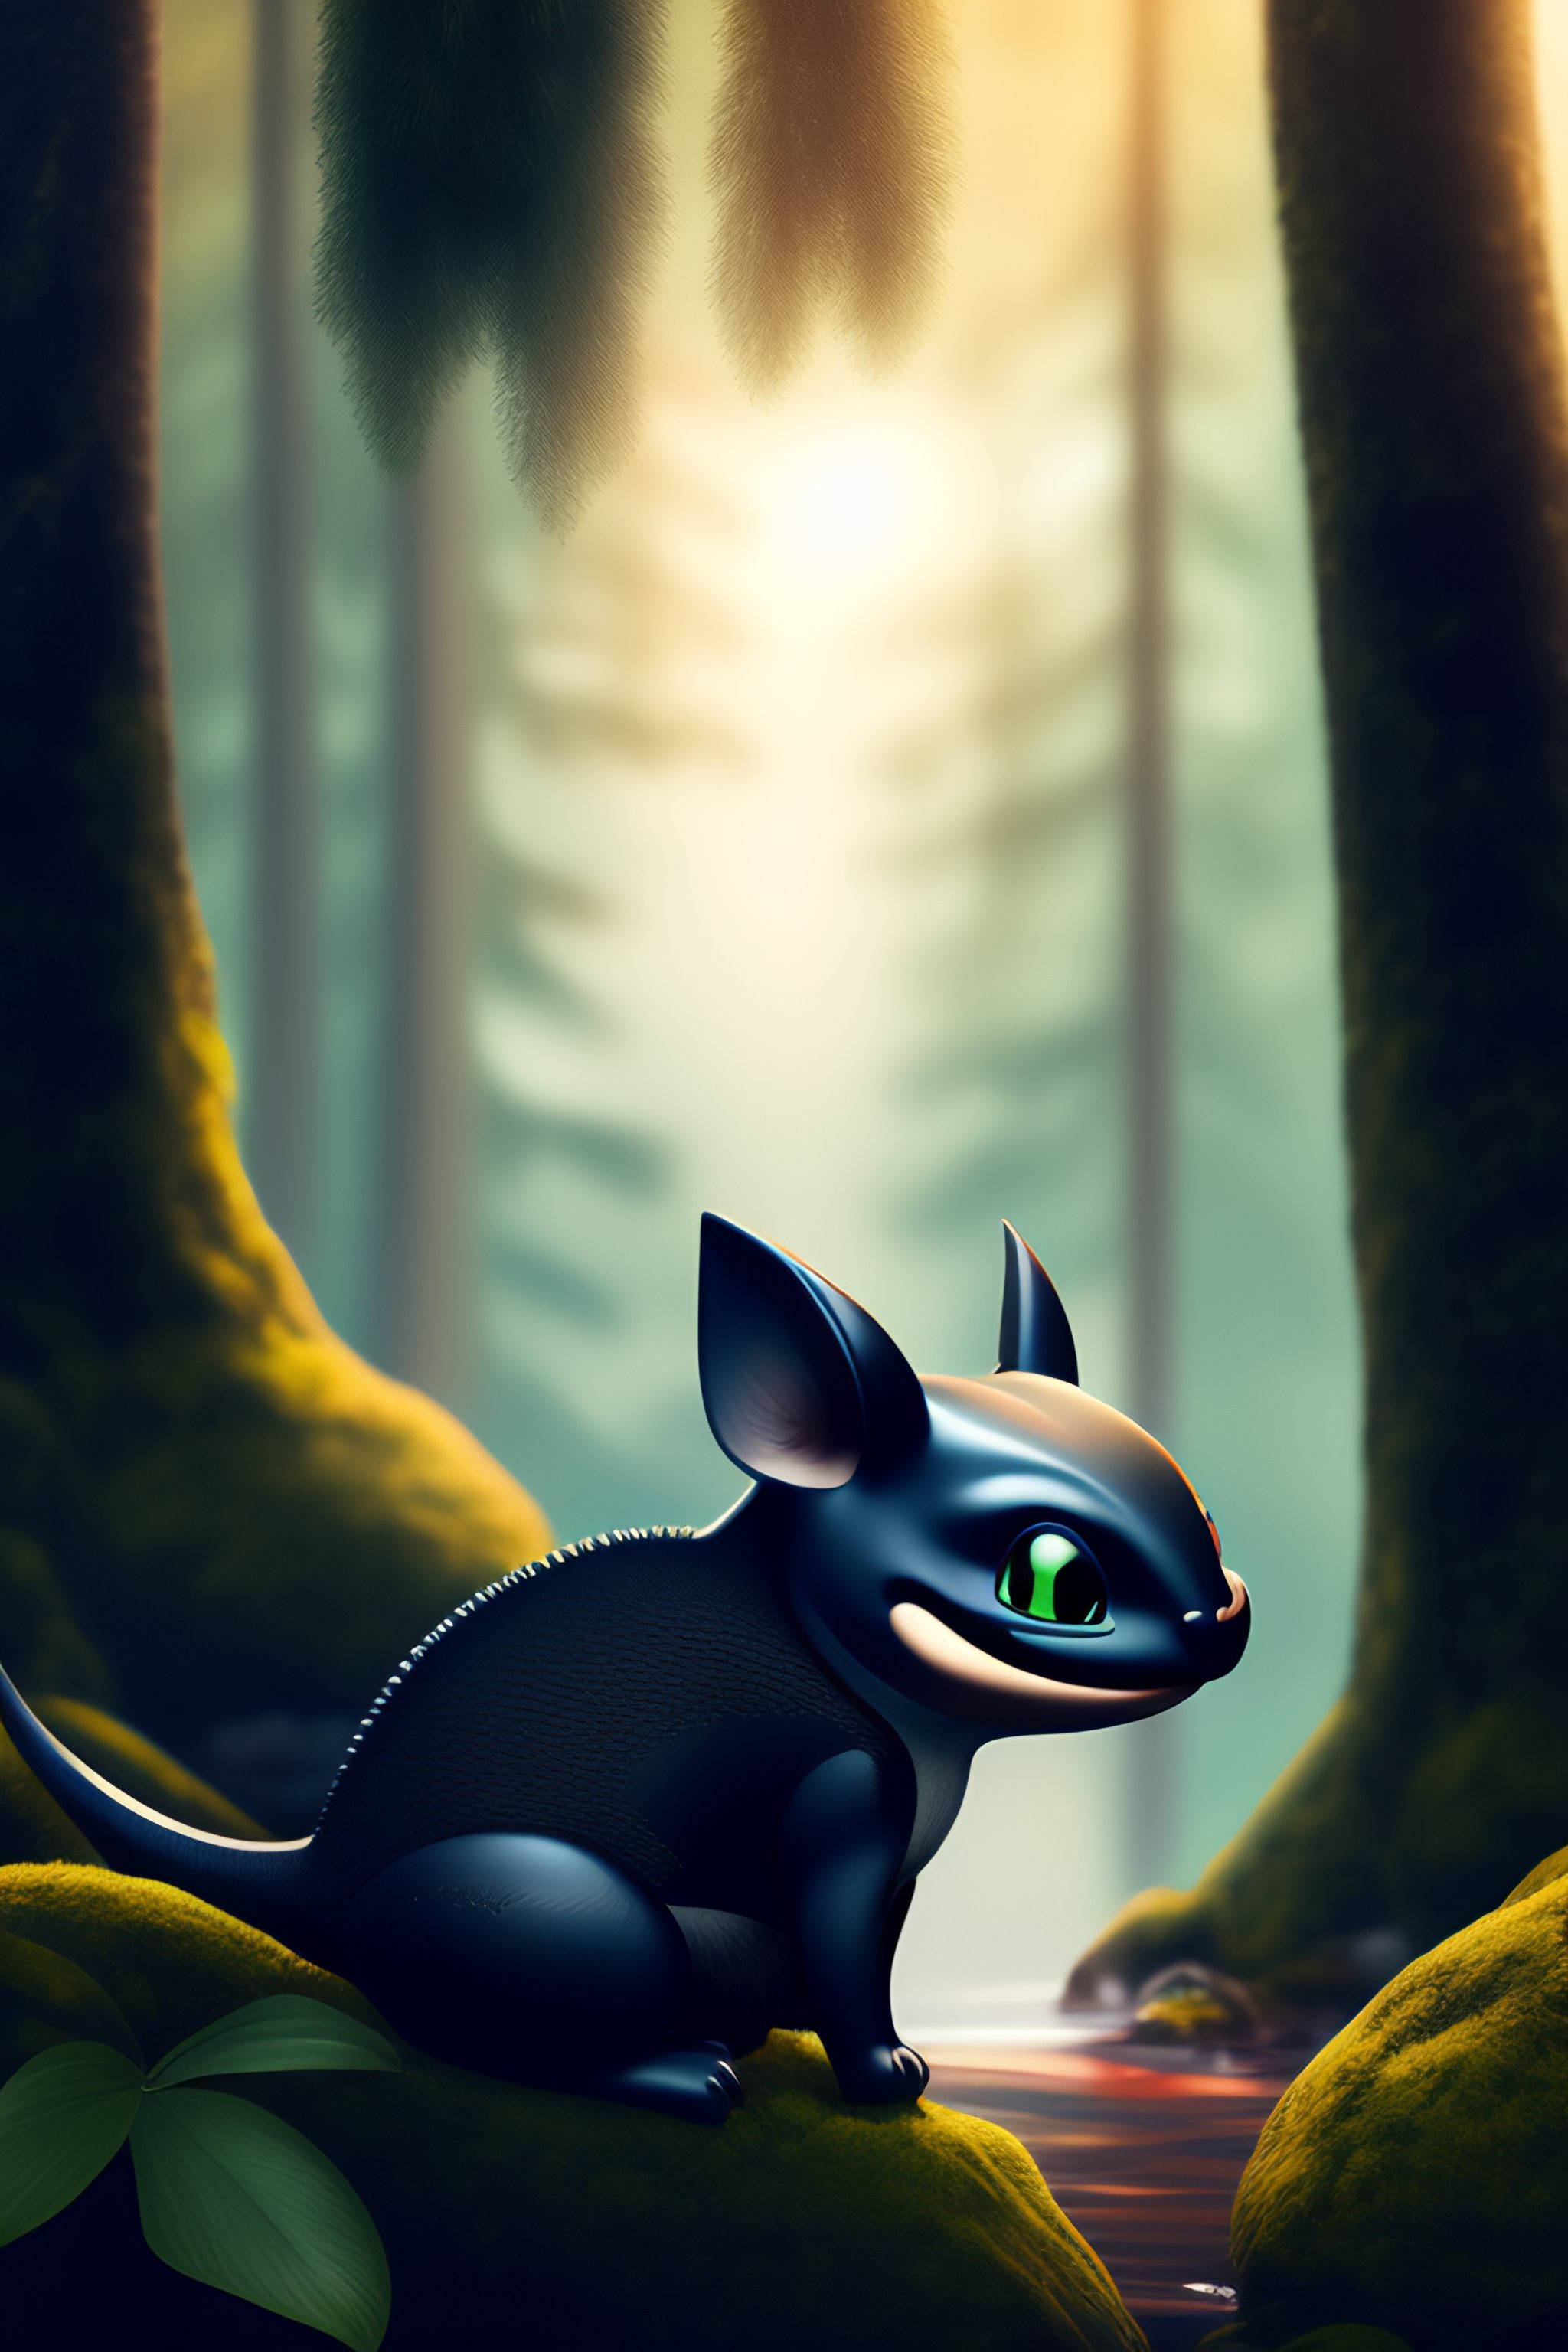 Lexica - Anthropomorphic Toothless in a middle of forest with river